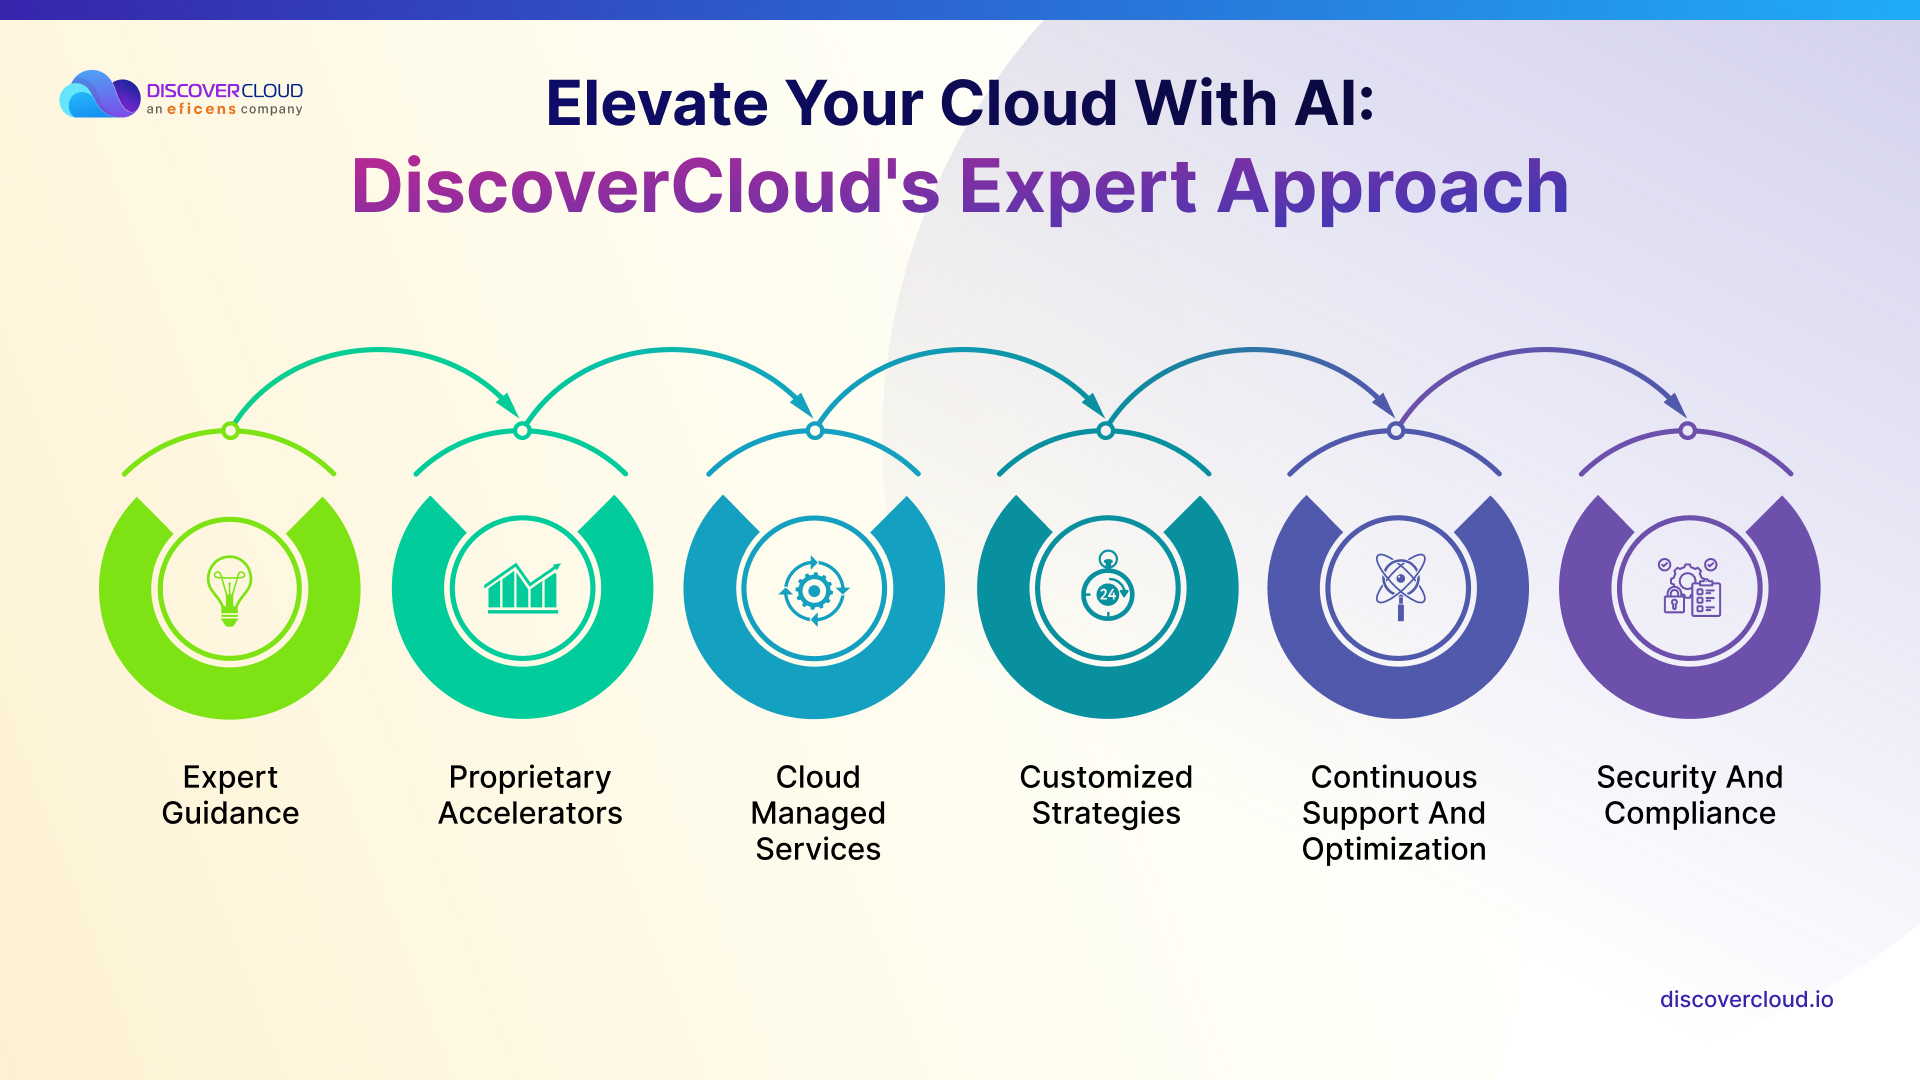 Elevate Your Cloud with AI: DiscoverCloud's Expert Approach